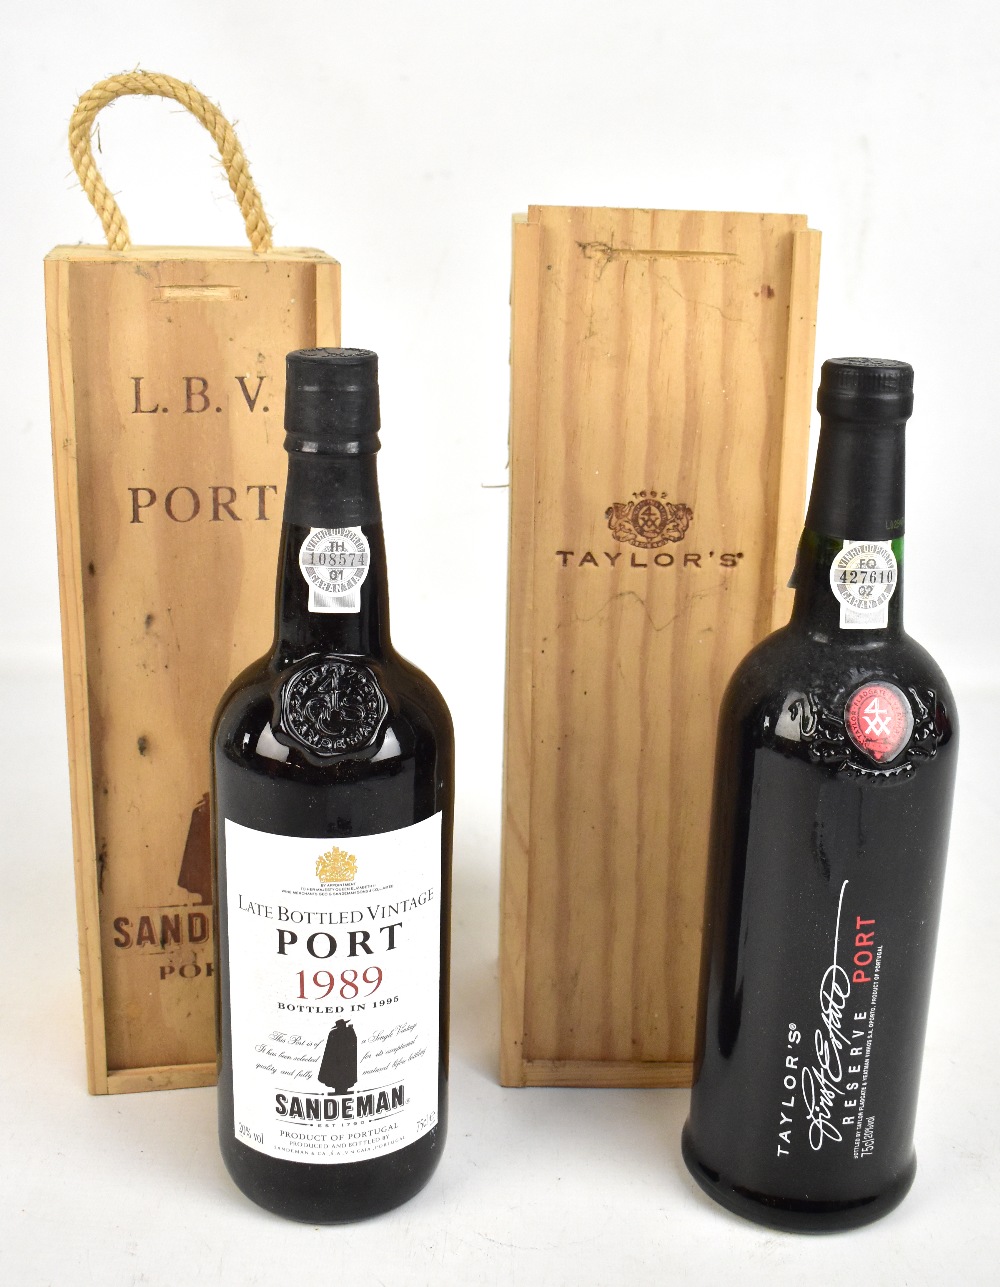 PORT; a 1989 Sandeman LBV, bottled in 1995, and a Taylor's Reserve Port, both fitted in wooden